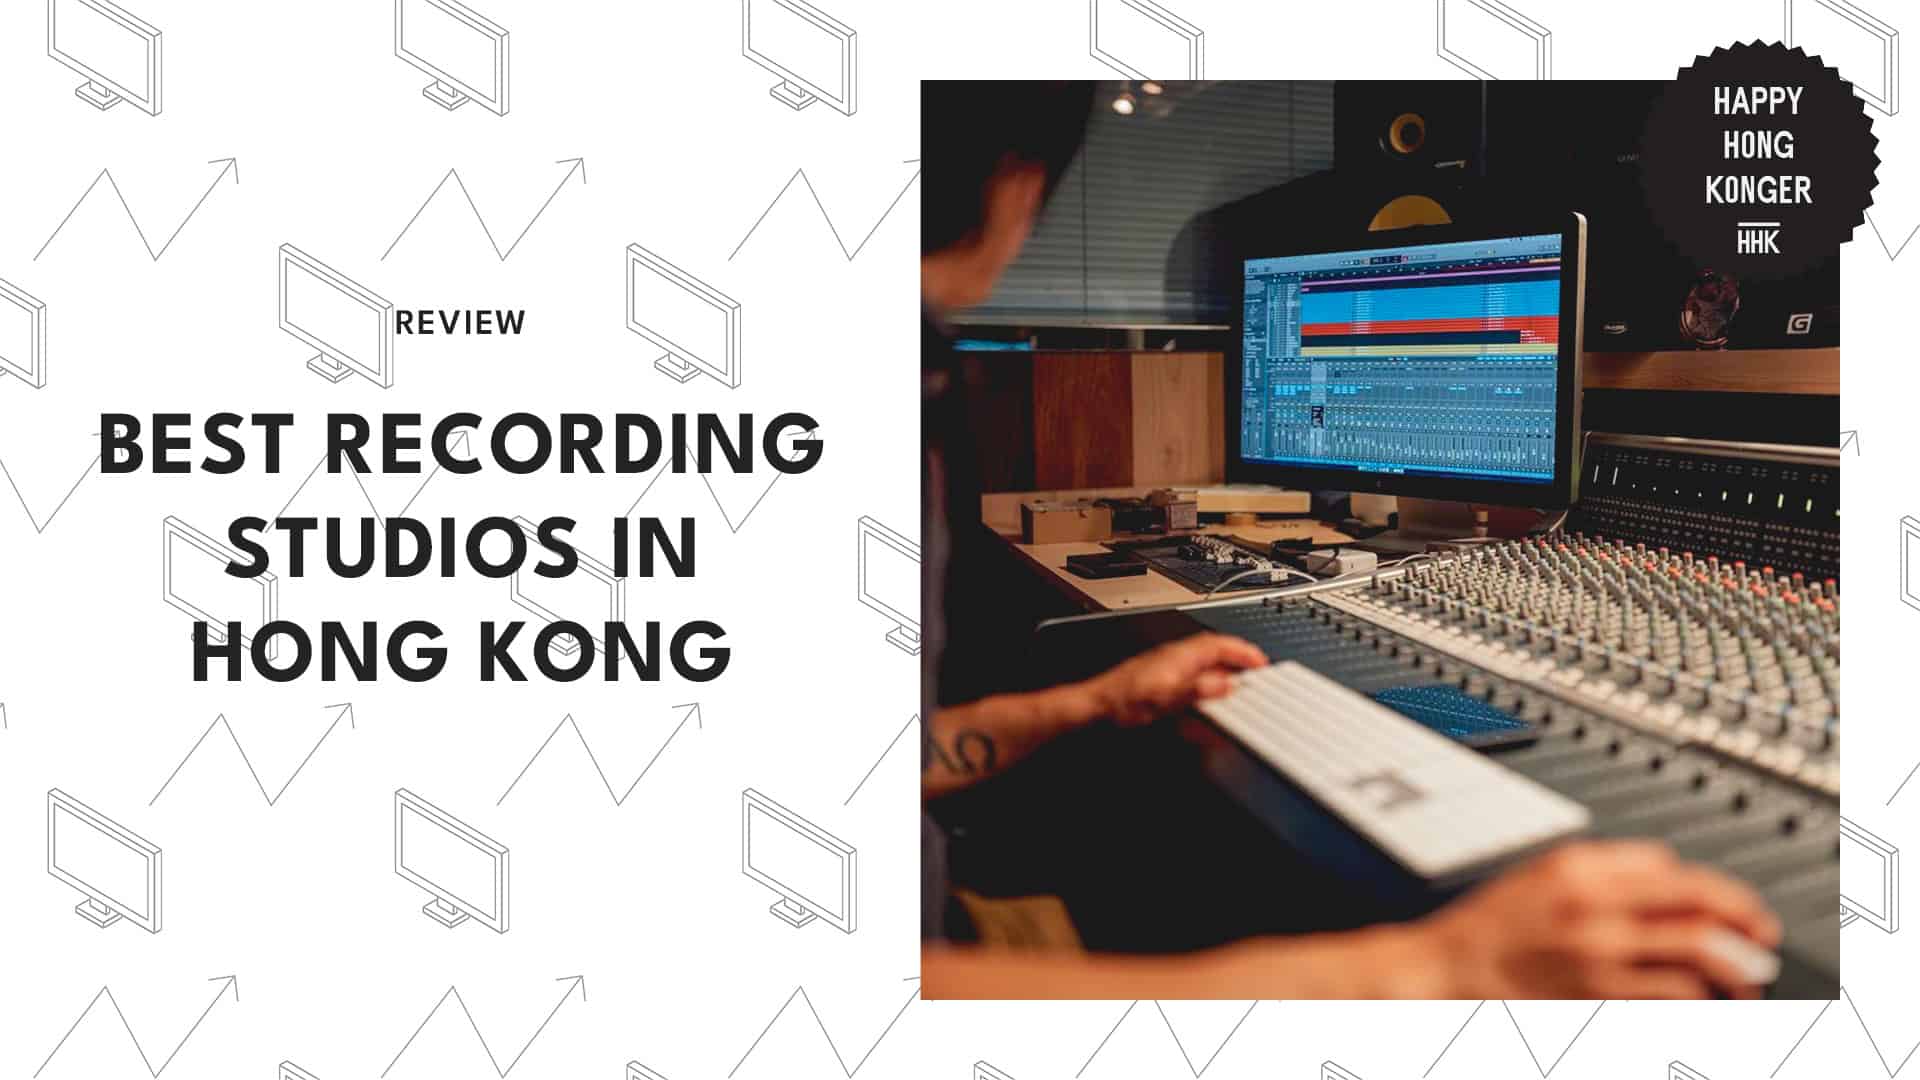 Beyoncé Would Approve The 5 Best Recording Studios in Hong Kong